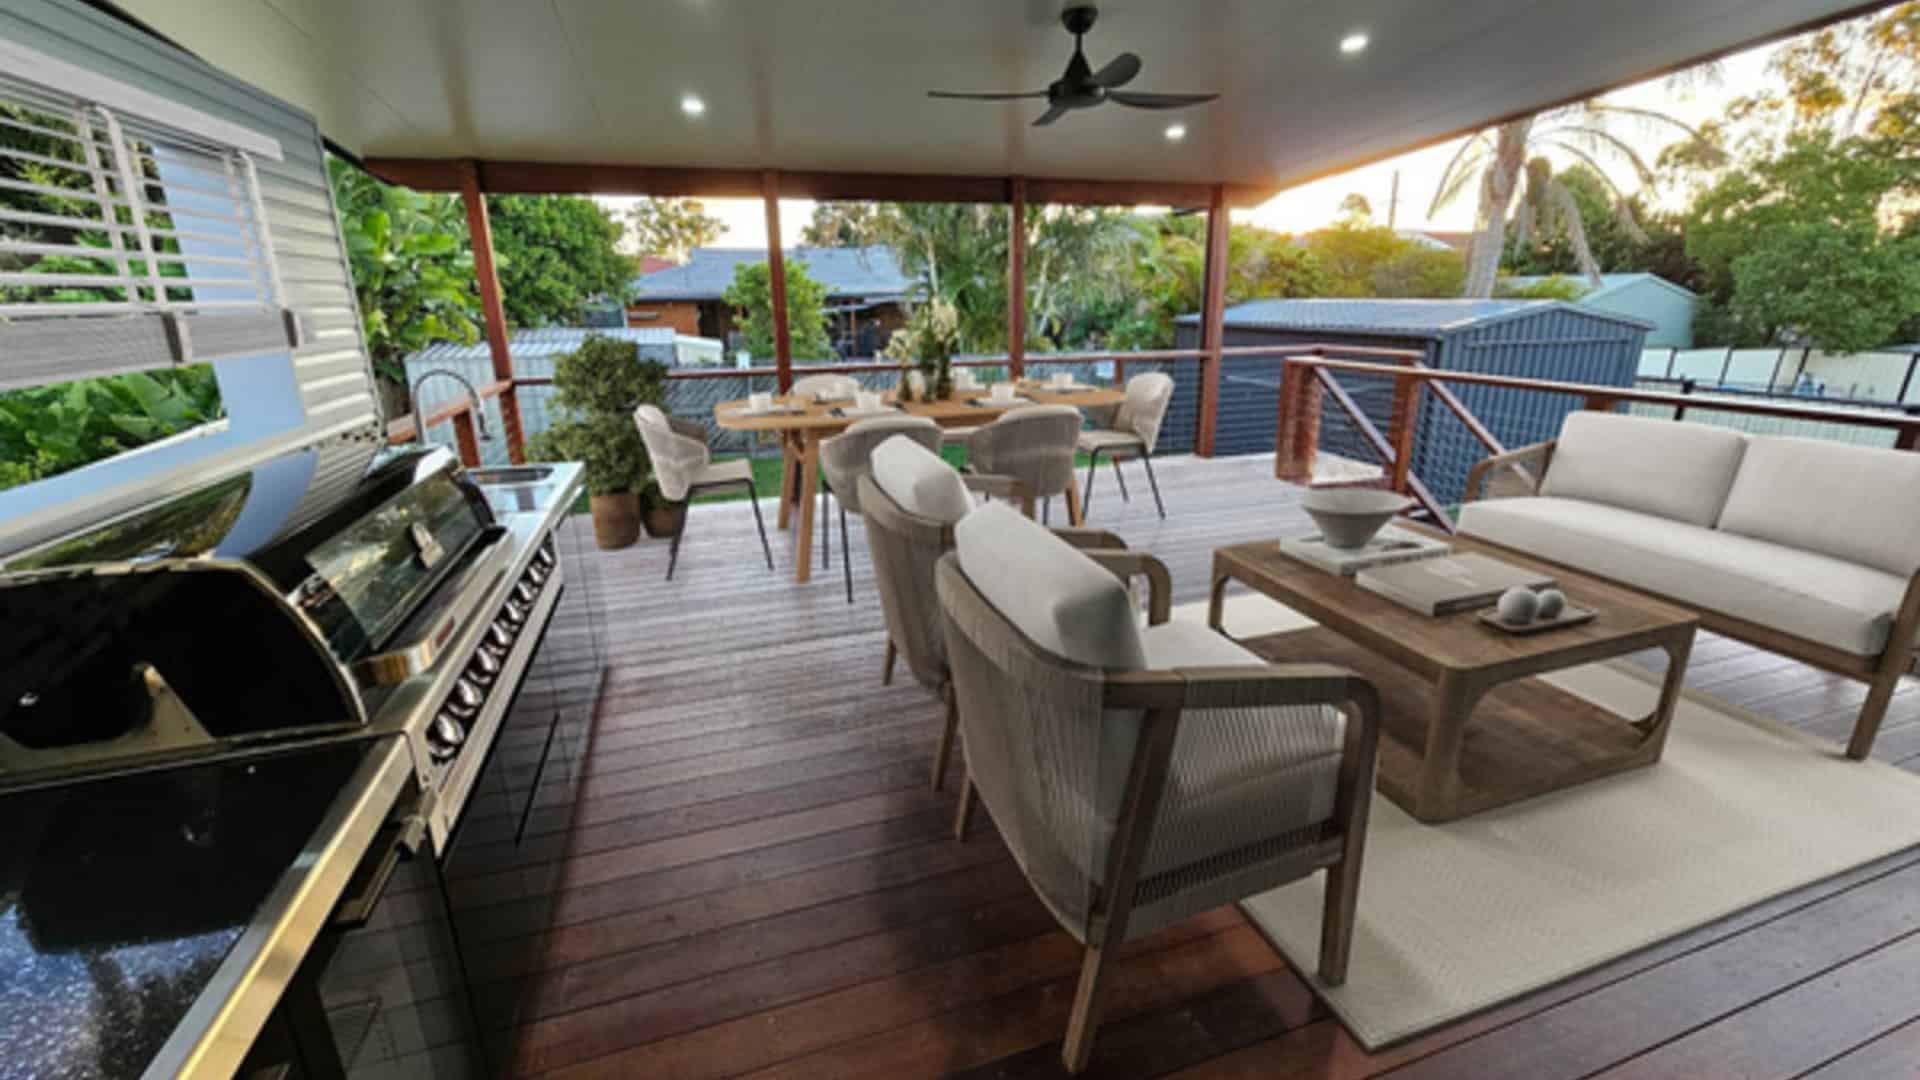 Custom built entertaining timber deck with slimline patio roof built by Hammer & Chisel Carpentry, Brisbane. Barbeque, entertain, relax and enjoy life with family & friends.